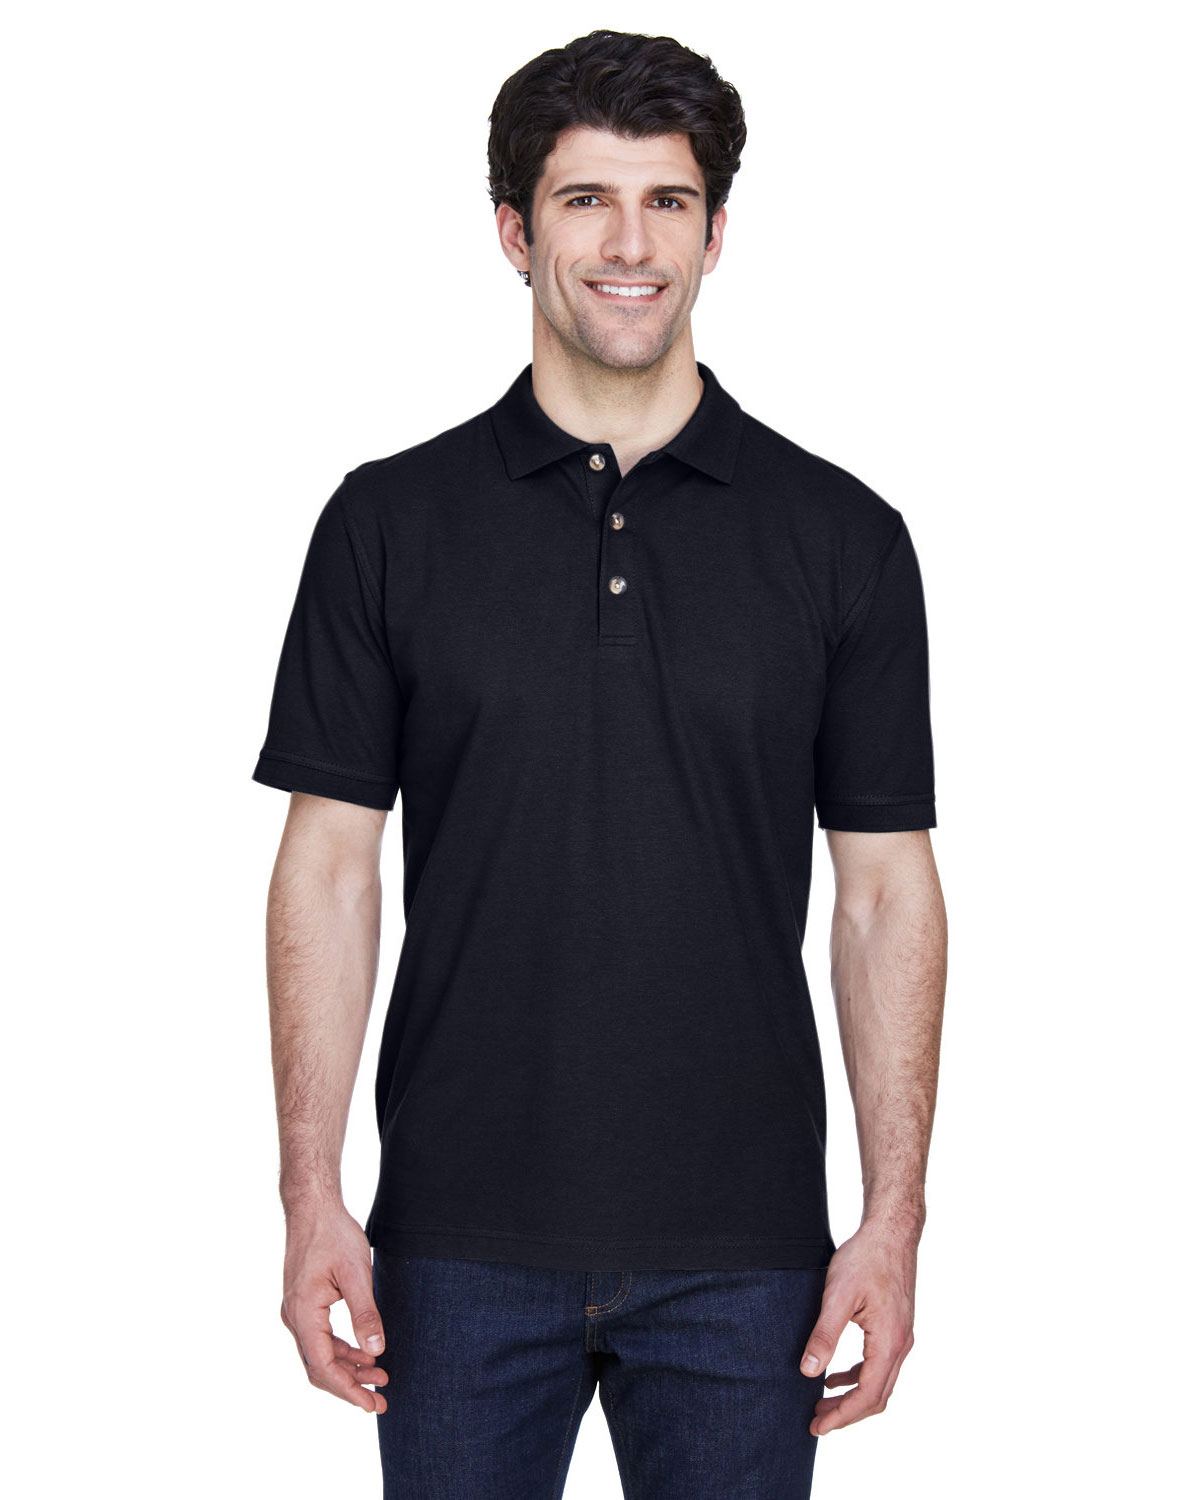 UltraClub 8535T Men Tall Classic Pique Polo at Apparelstation